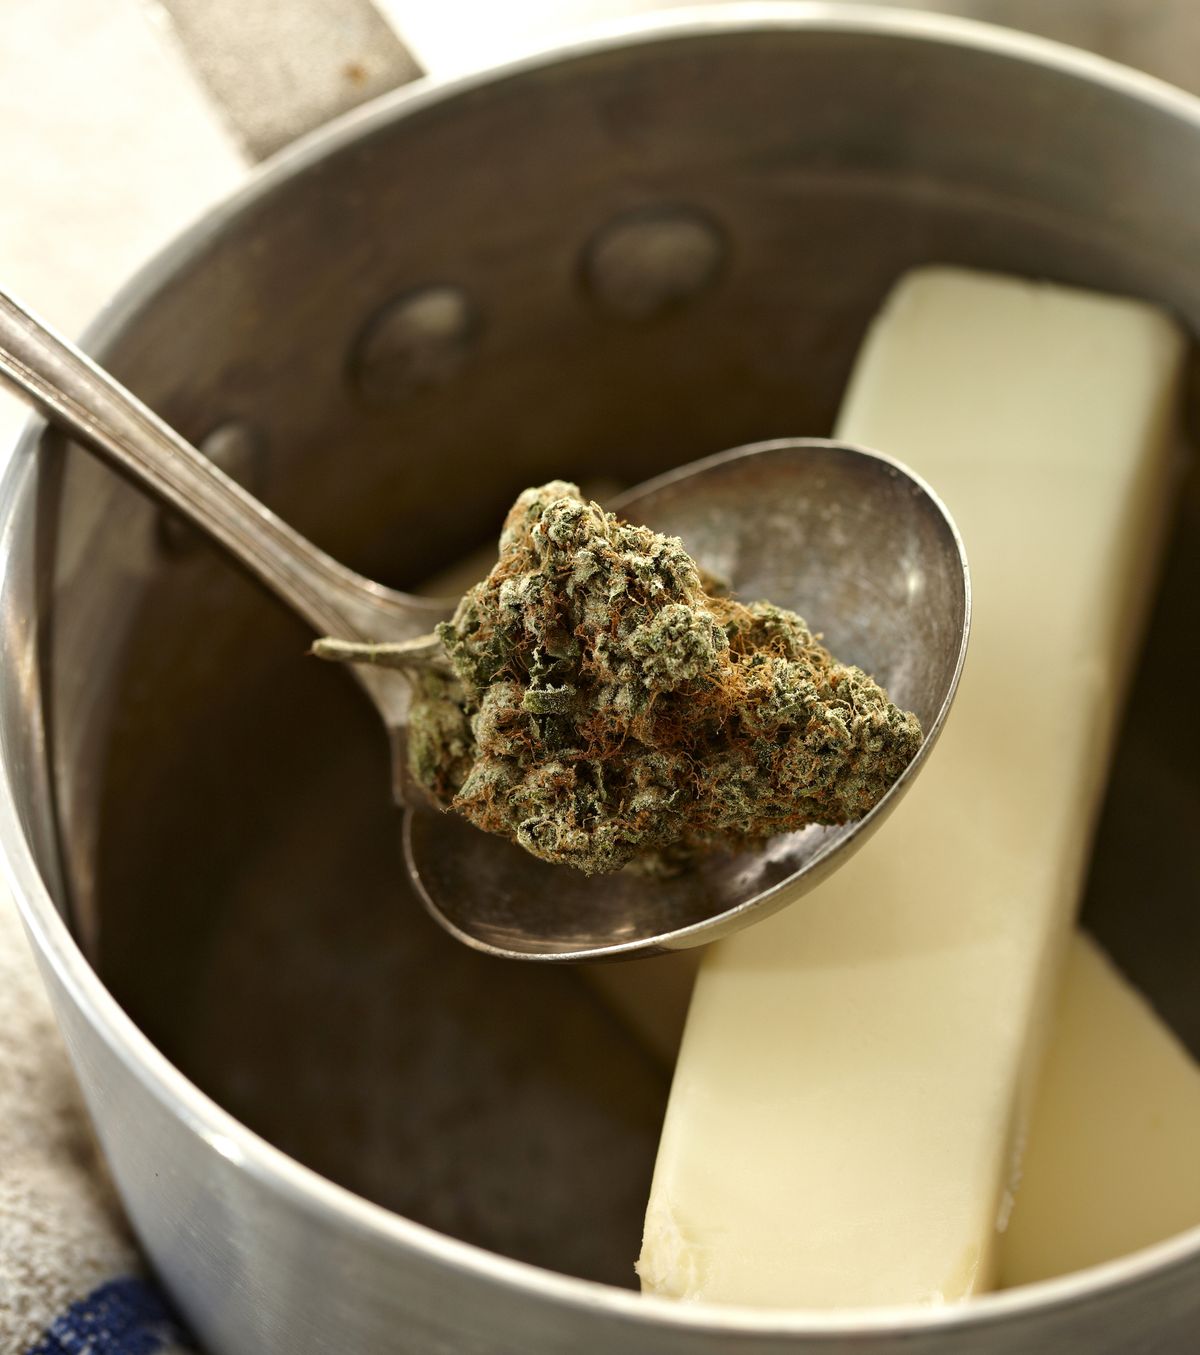 to Make Butter - Marijuana-Infused Brown Butter Recipe